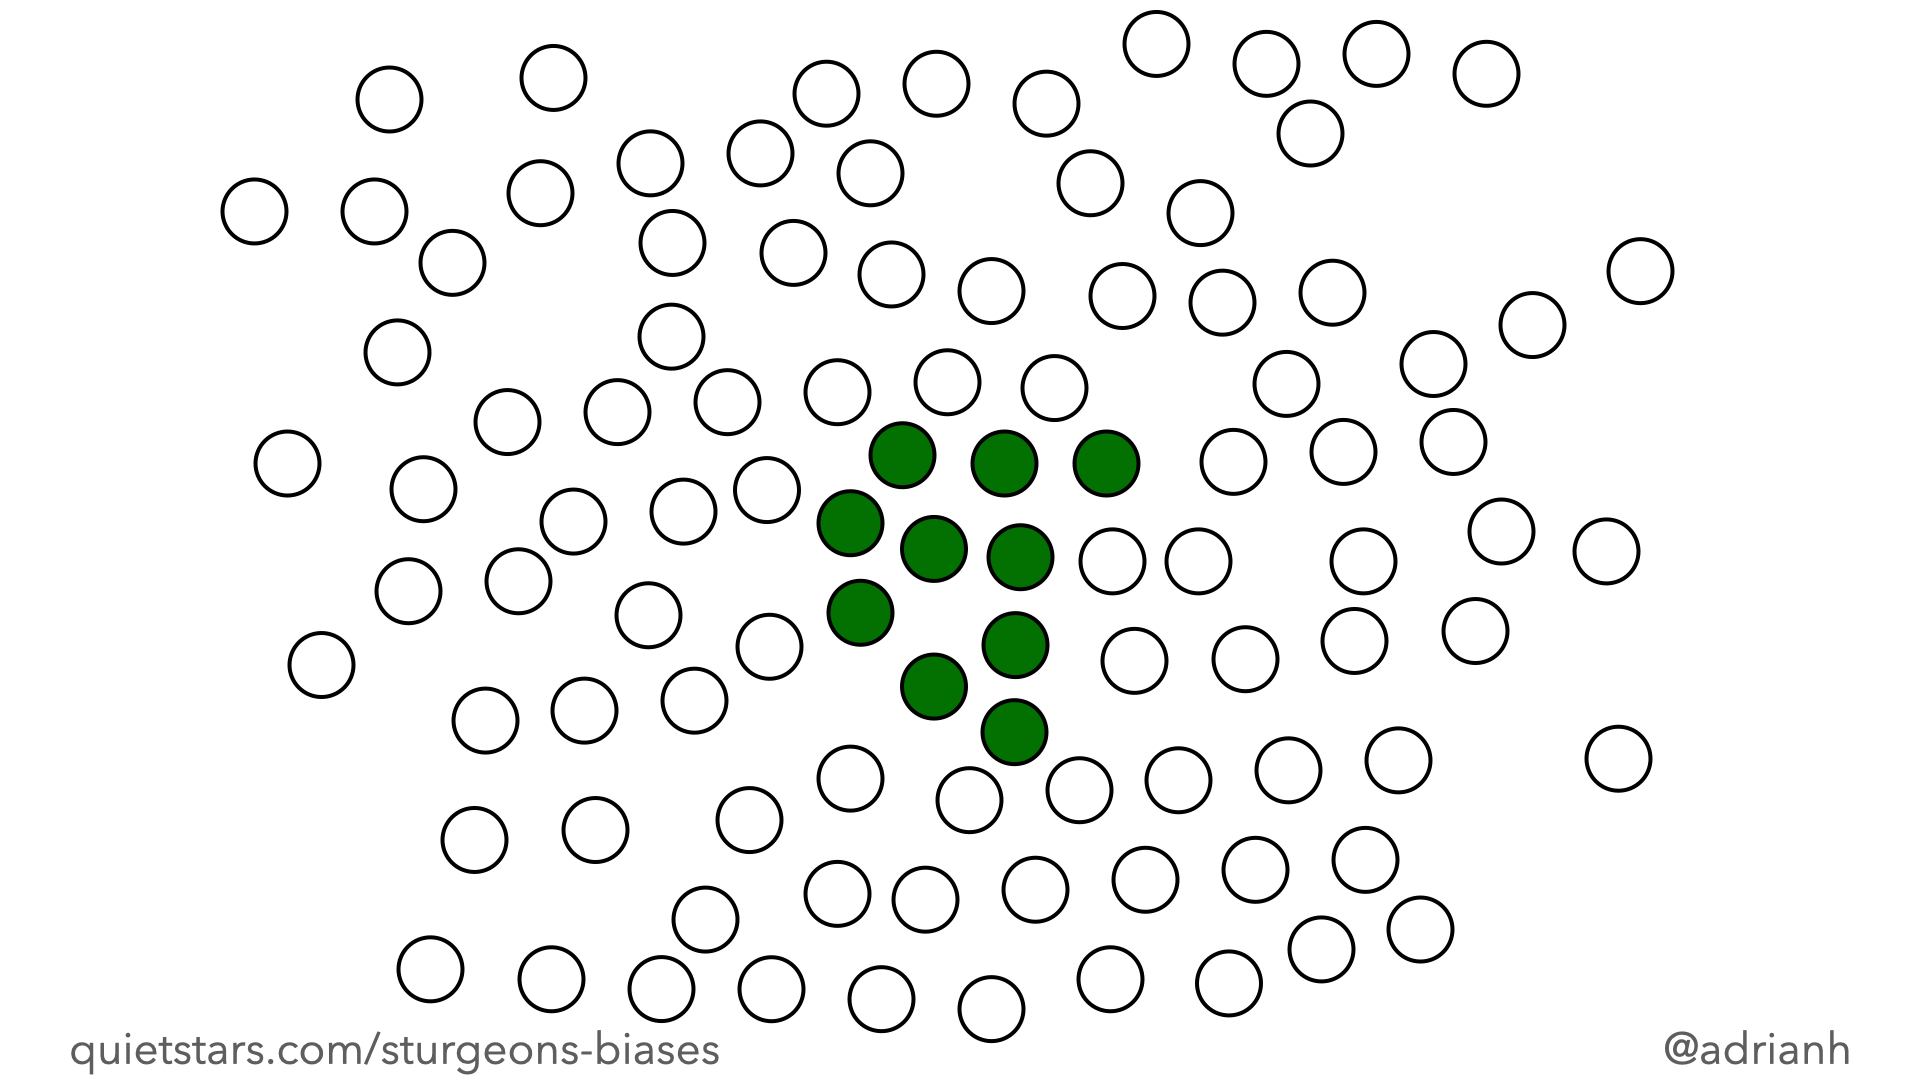 Ten green circles are clustered in the middle of the image. They are surrounded by ninety white circles distributed at random.